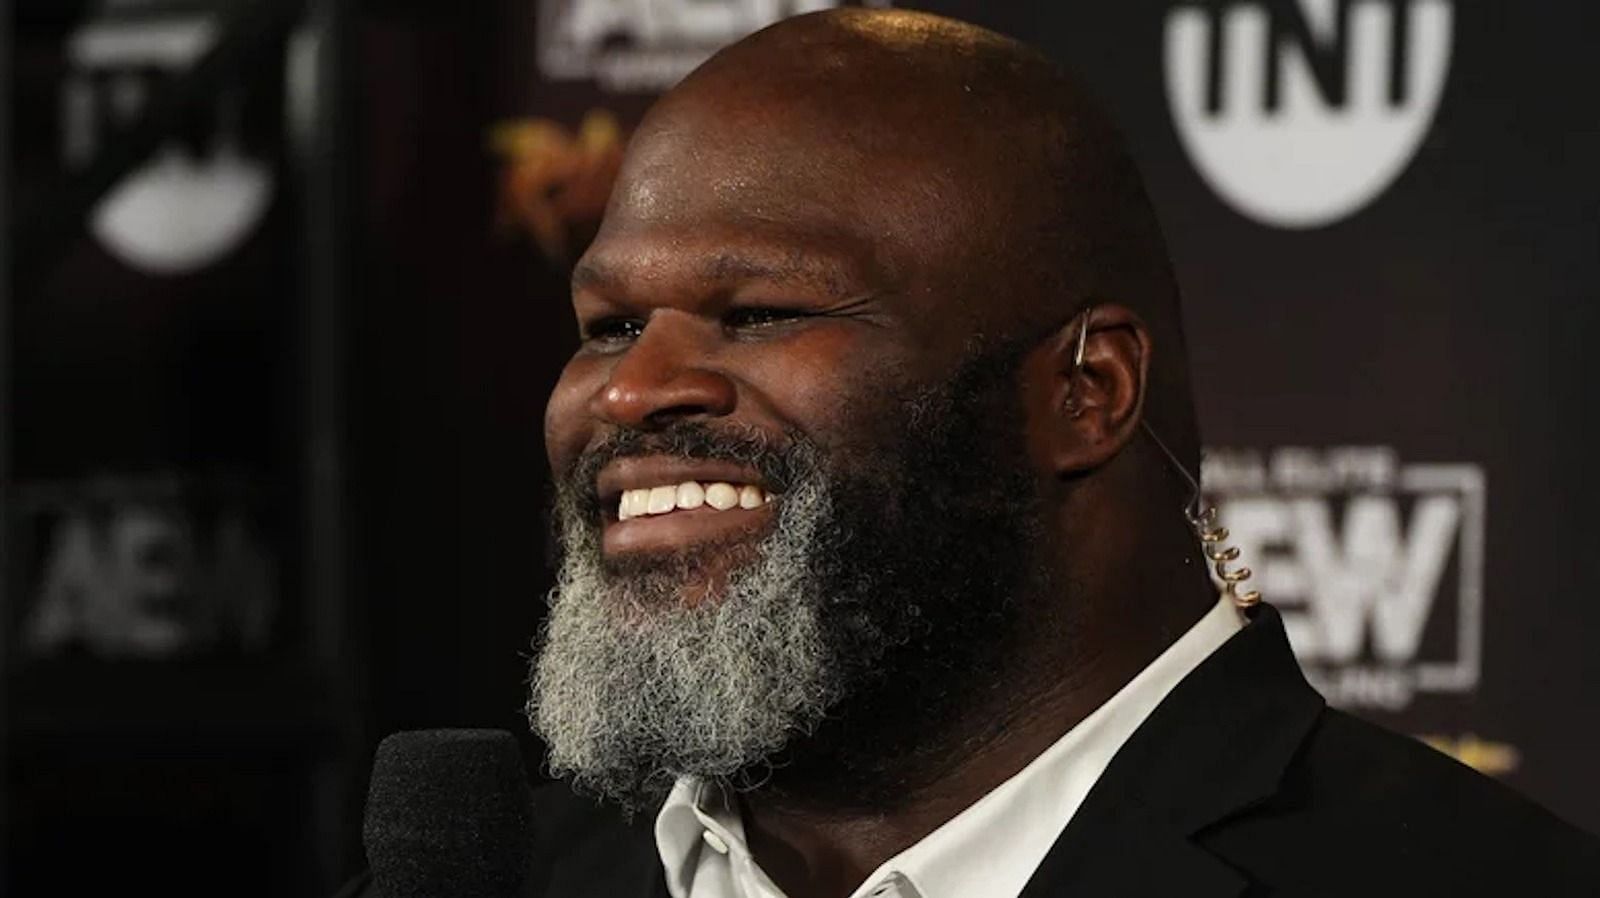 Mark Henry upset that WWE using concussion angle during match